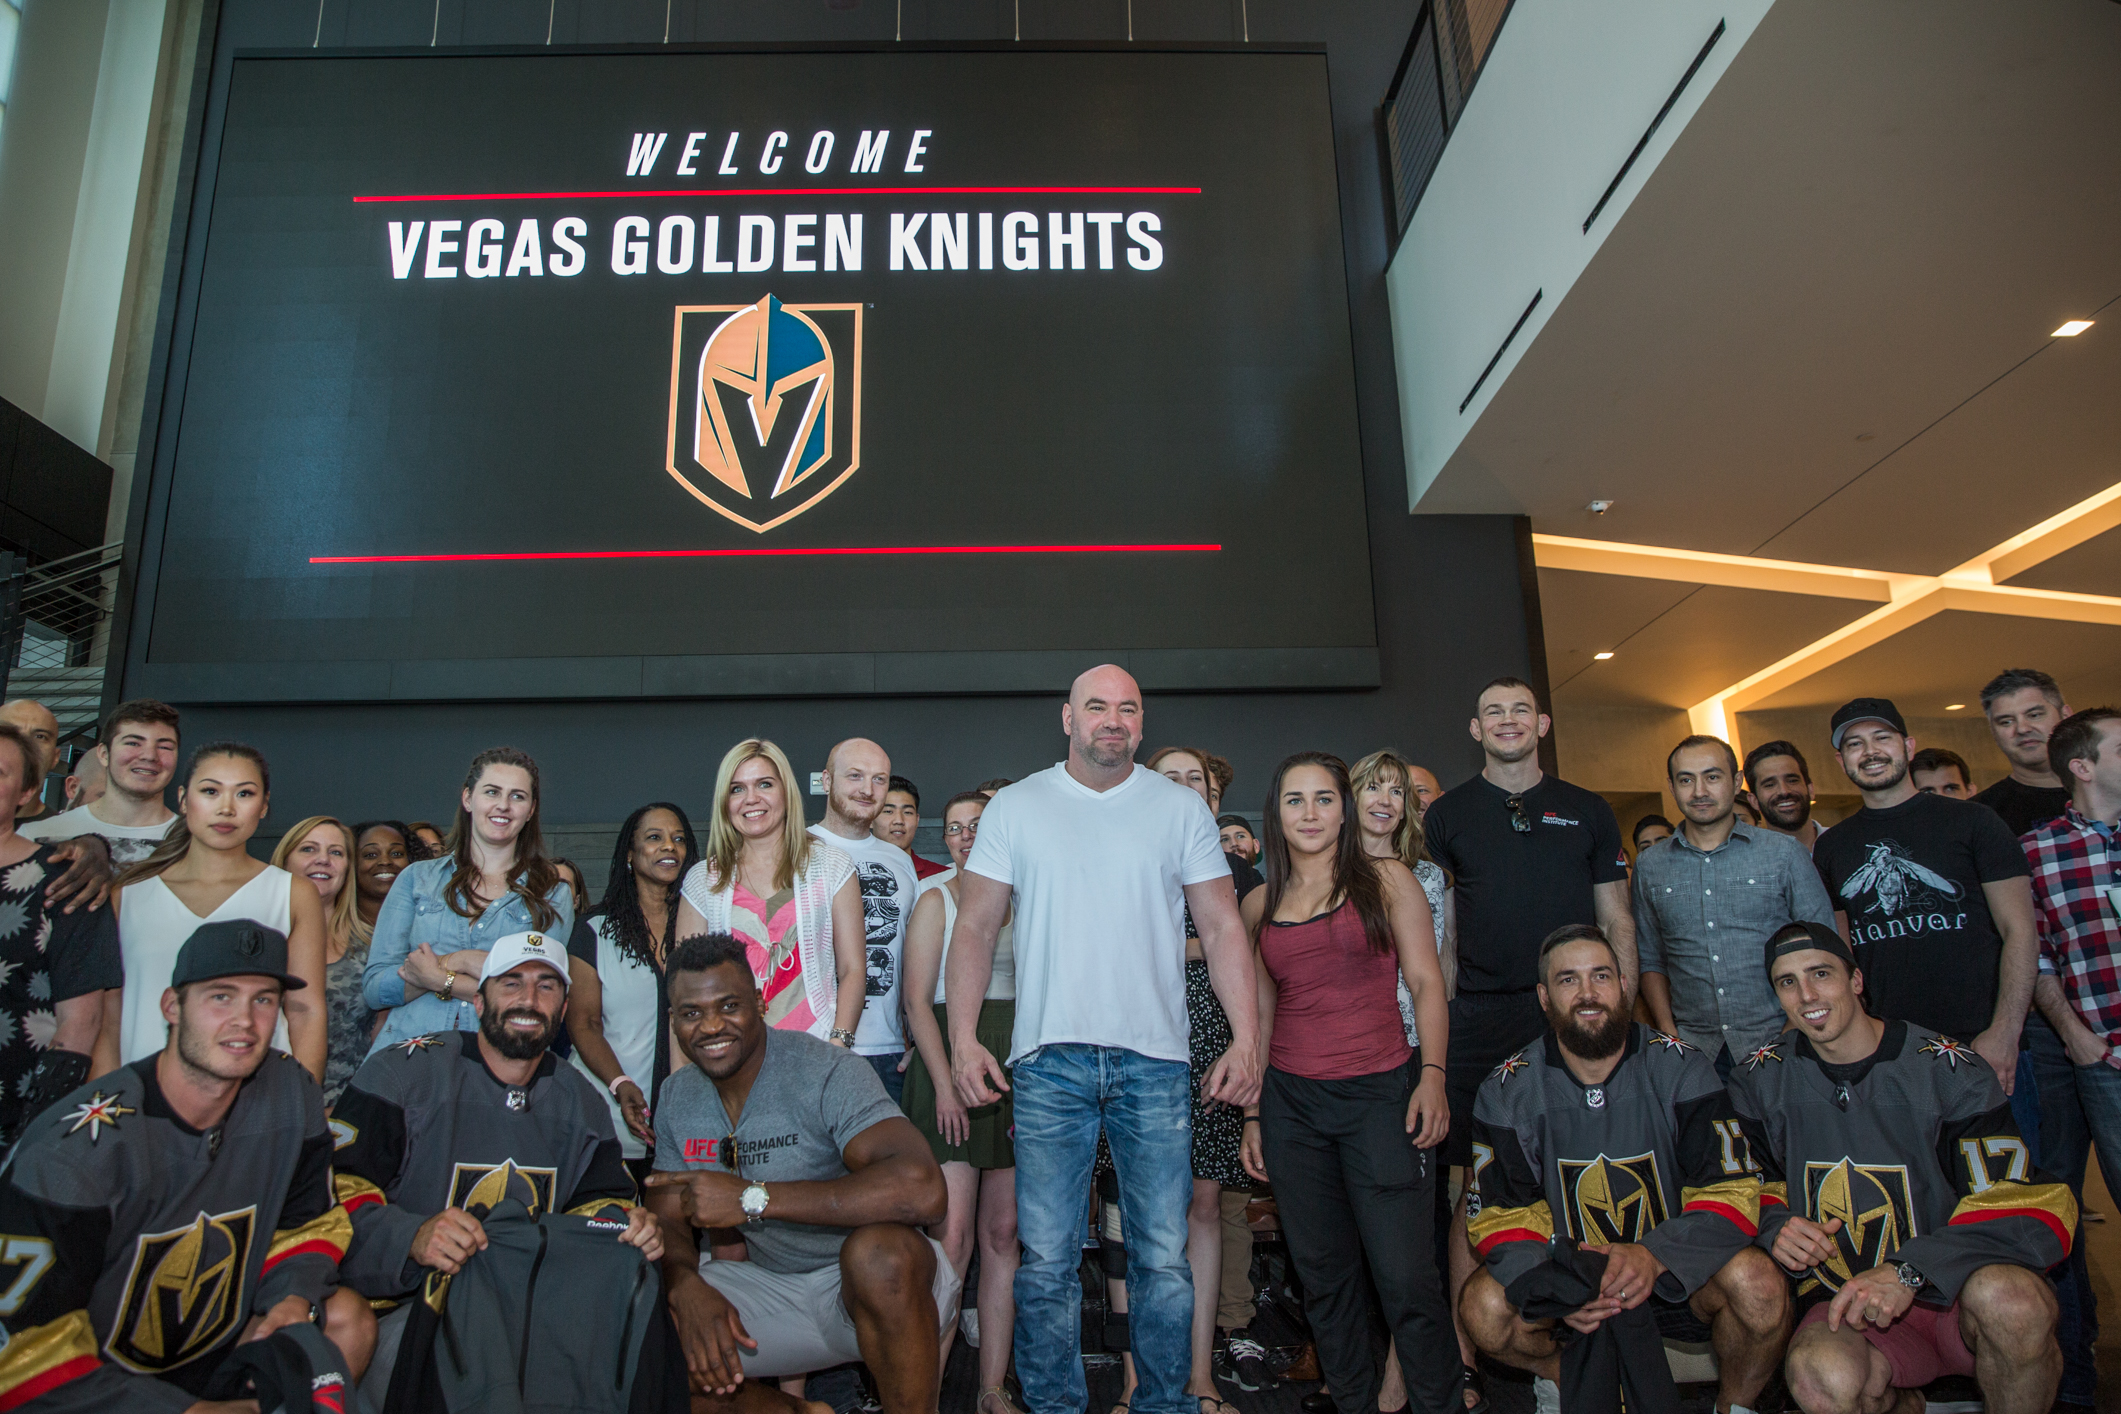 LAS VEGAS - JUNE 22: UFC president Dana White, heavyweight contender Francis Ngannou and UFC staff welcome members of the NHL's newest franchise, the Vegas Golden Knights, to town Thursday at UFC headquarters. (Elliott Howard/Zuffa LLC)